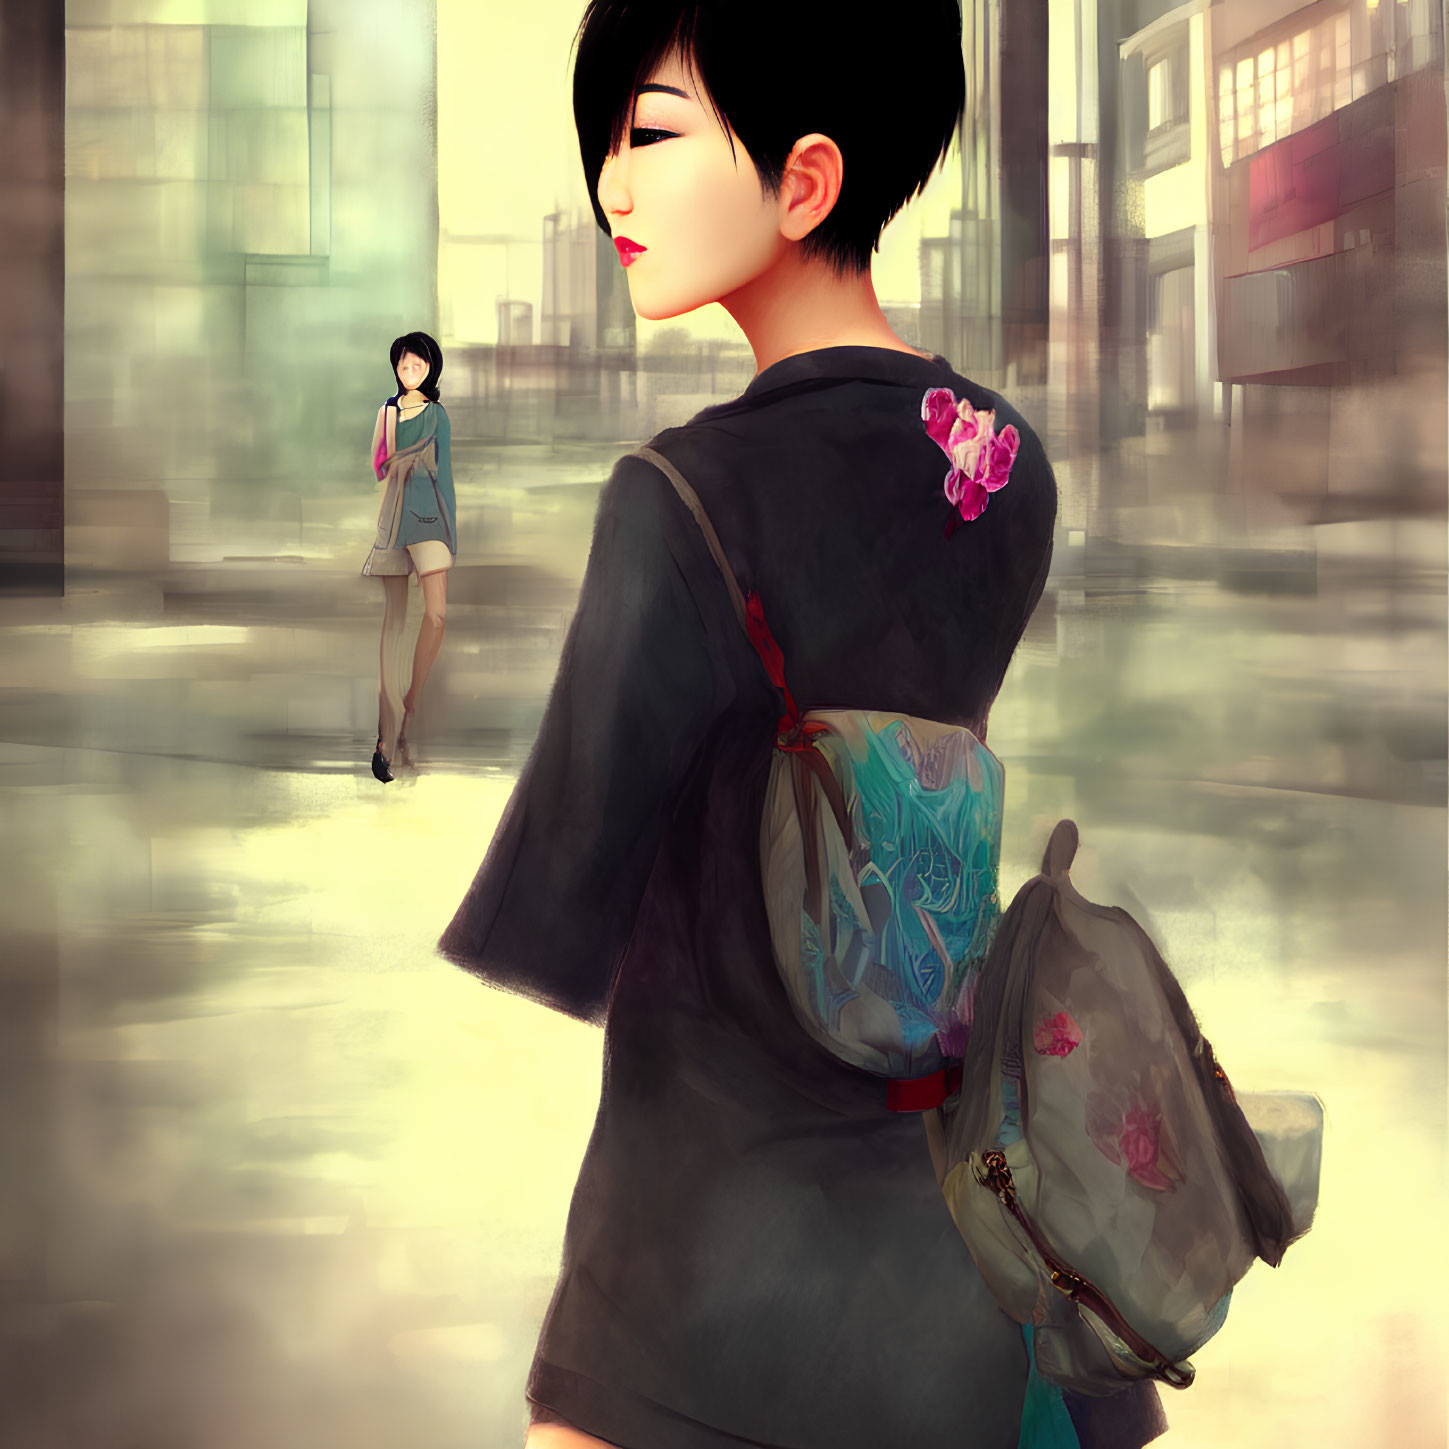 Stylized illustration of two women in modern clothing with Japanese elements